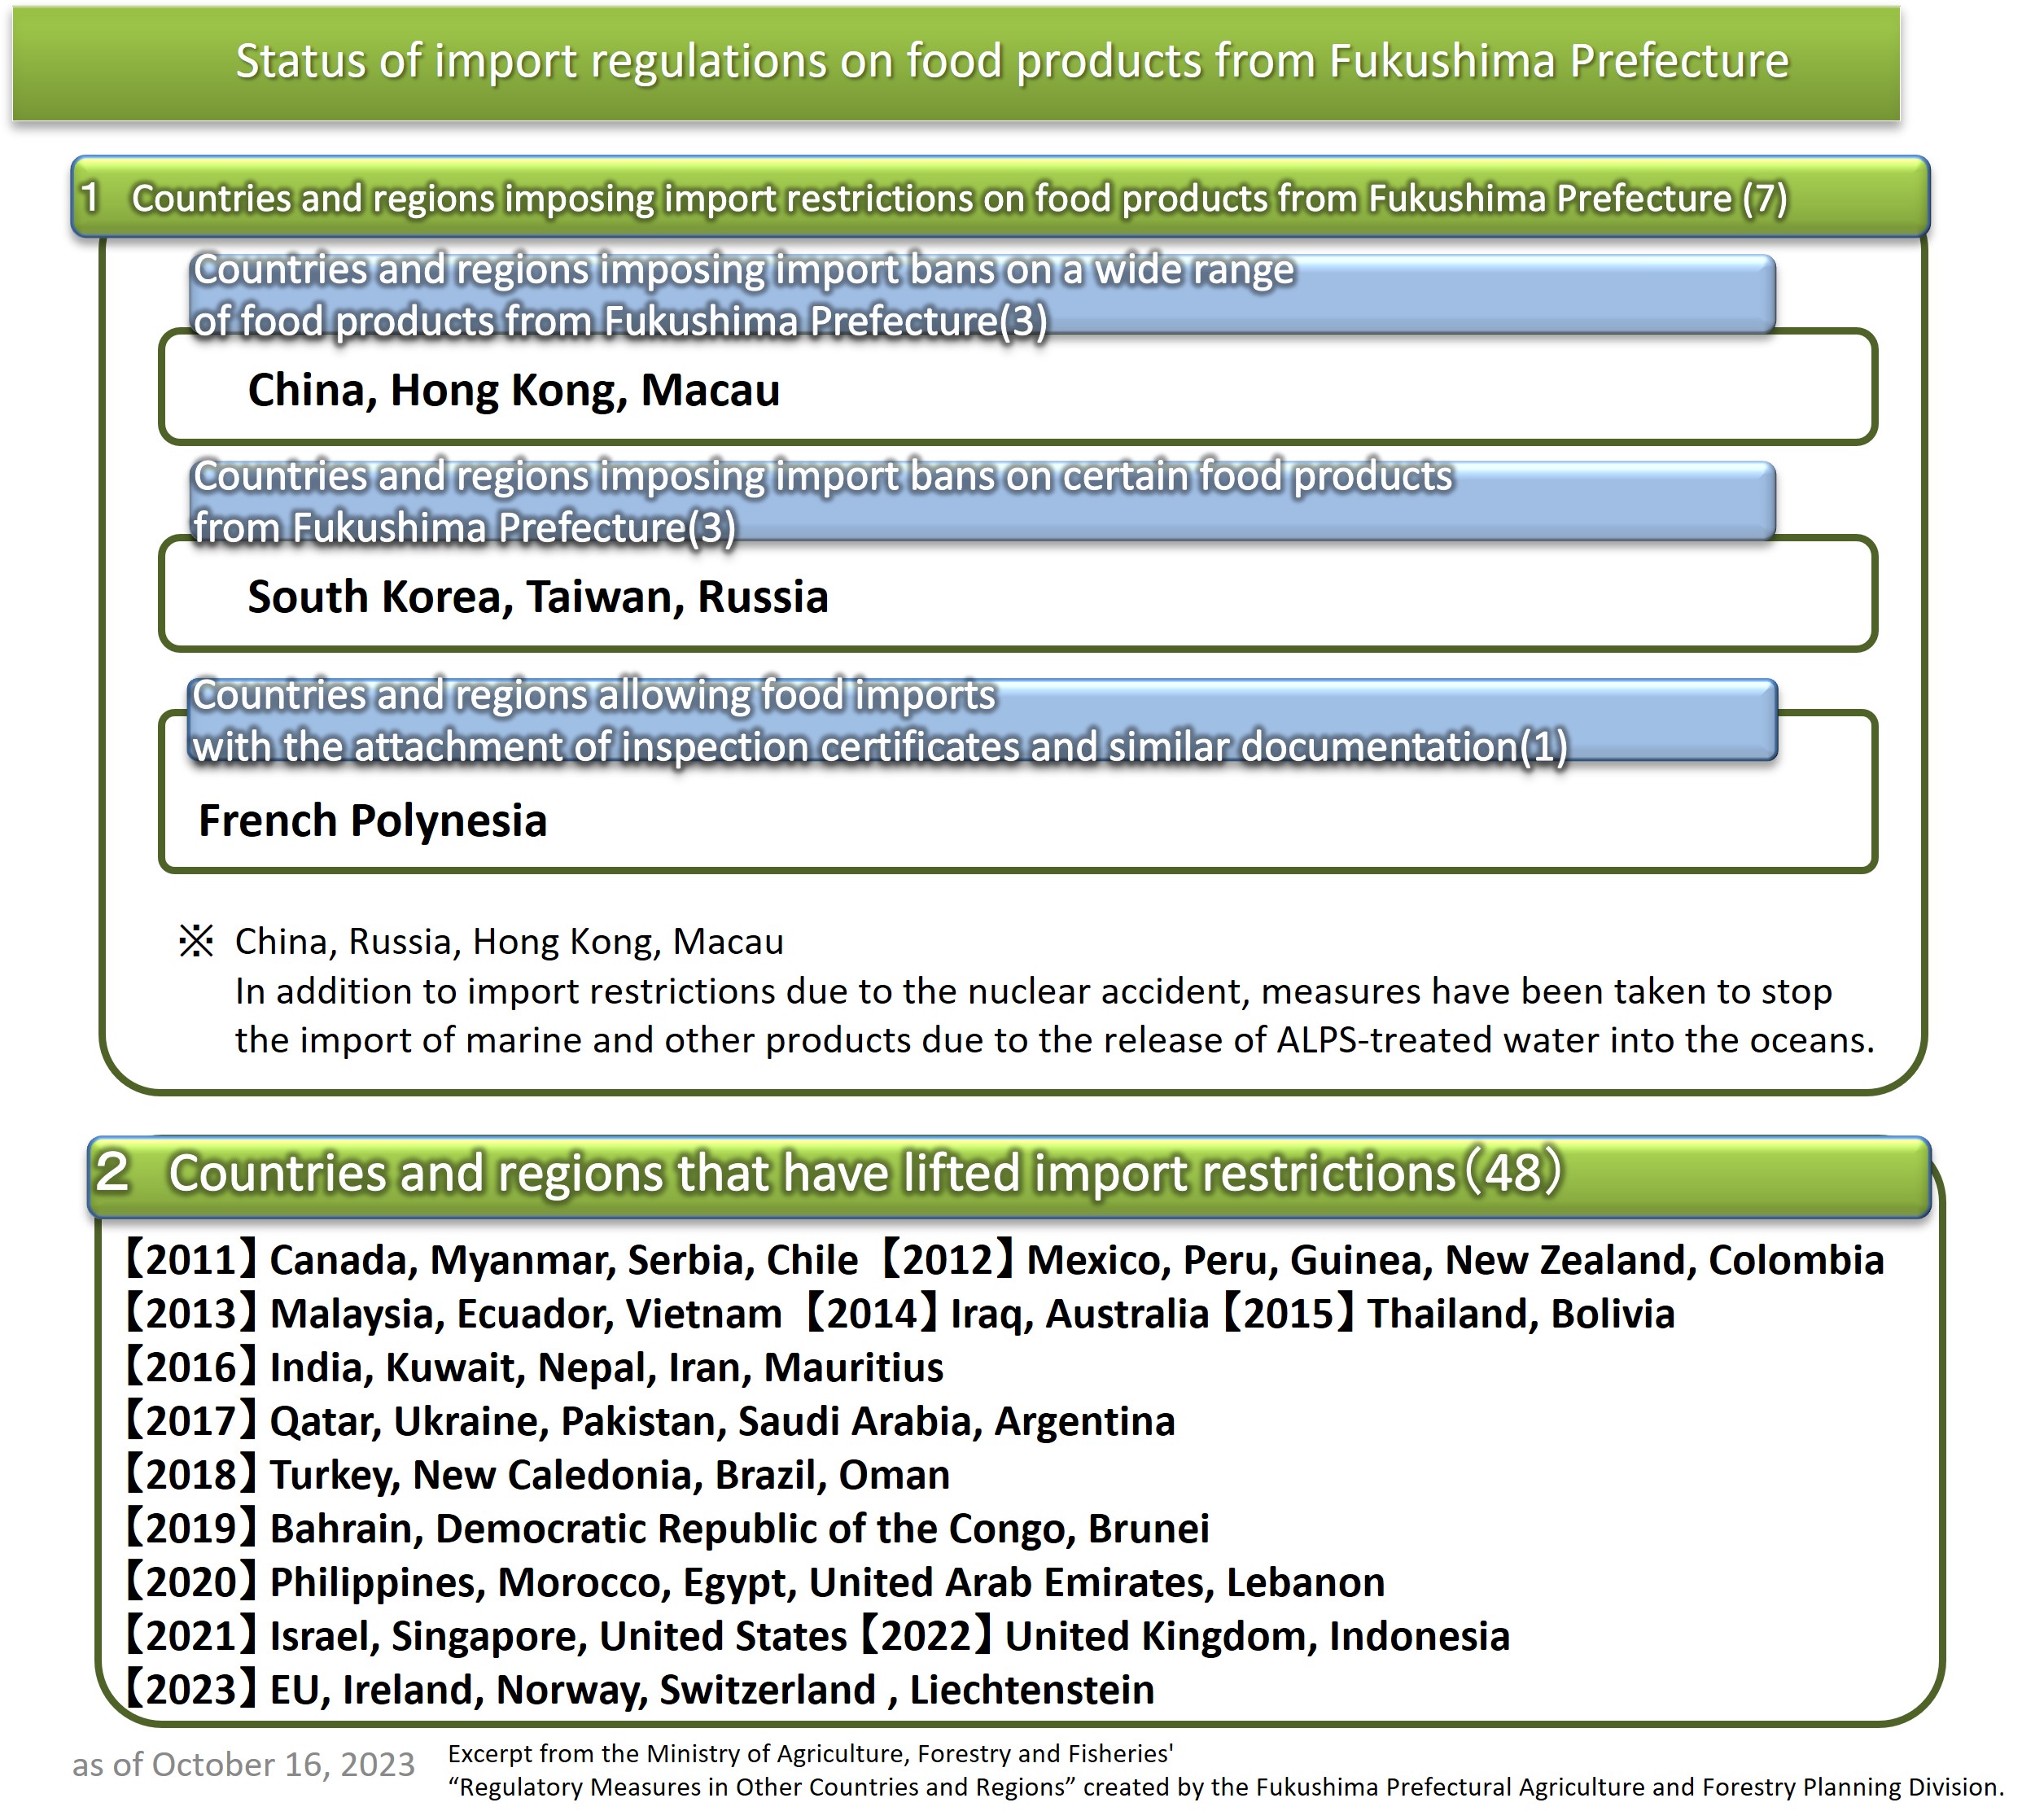 Status of import restrictions on food products from Fukushima Prefecture